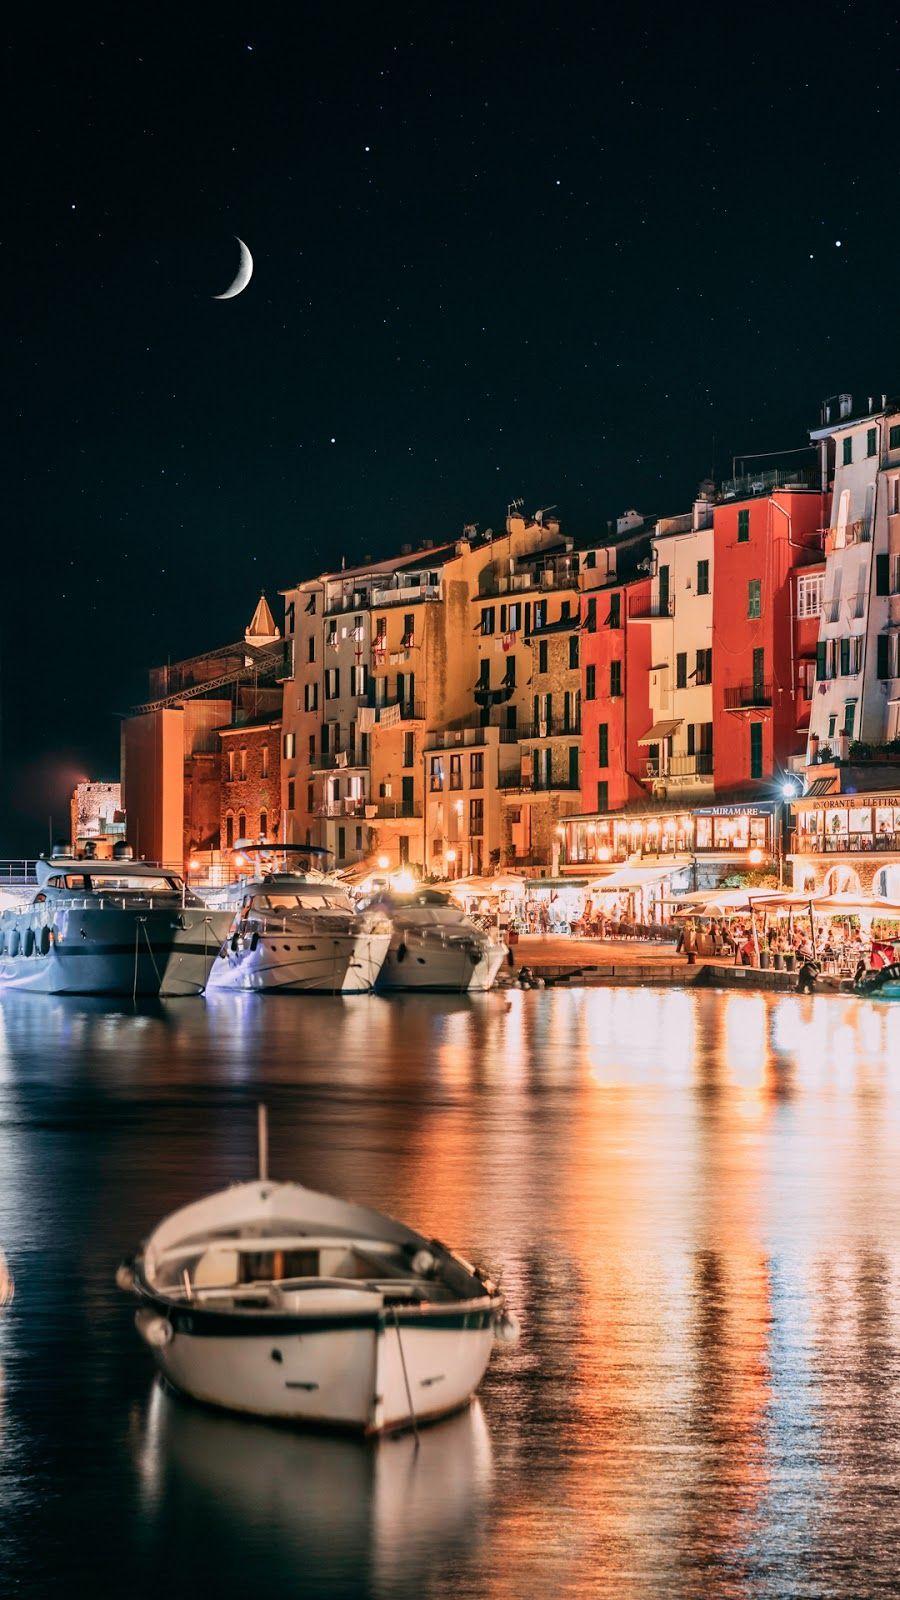 15 Excellent italy aesthetic wallpaper desktop You Can Save It Without ...